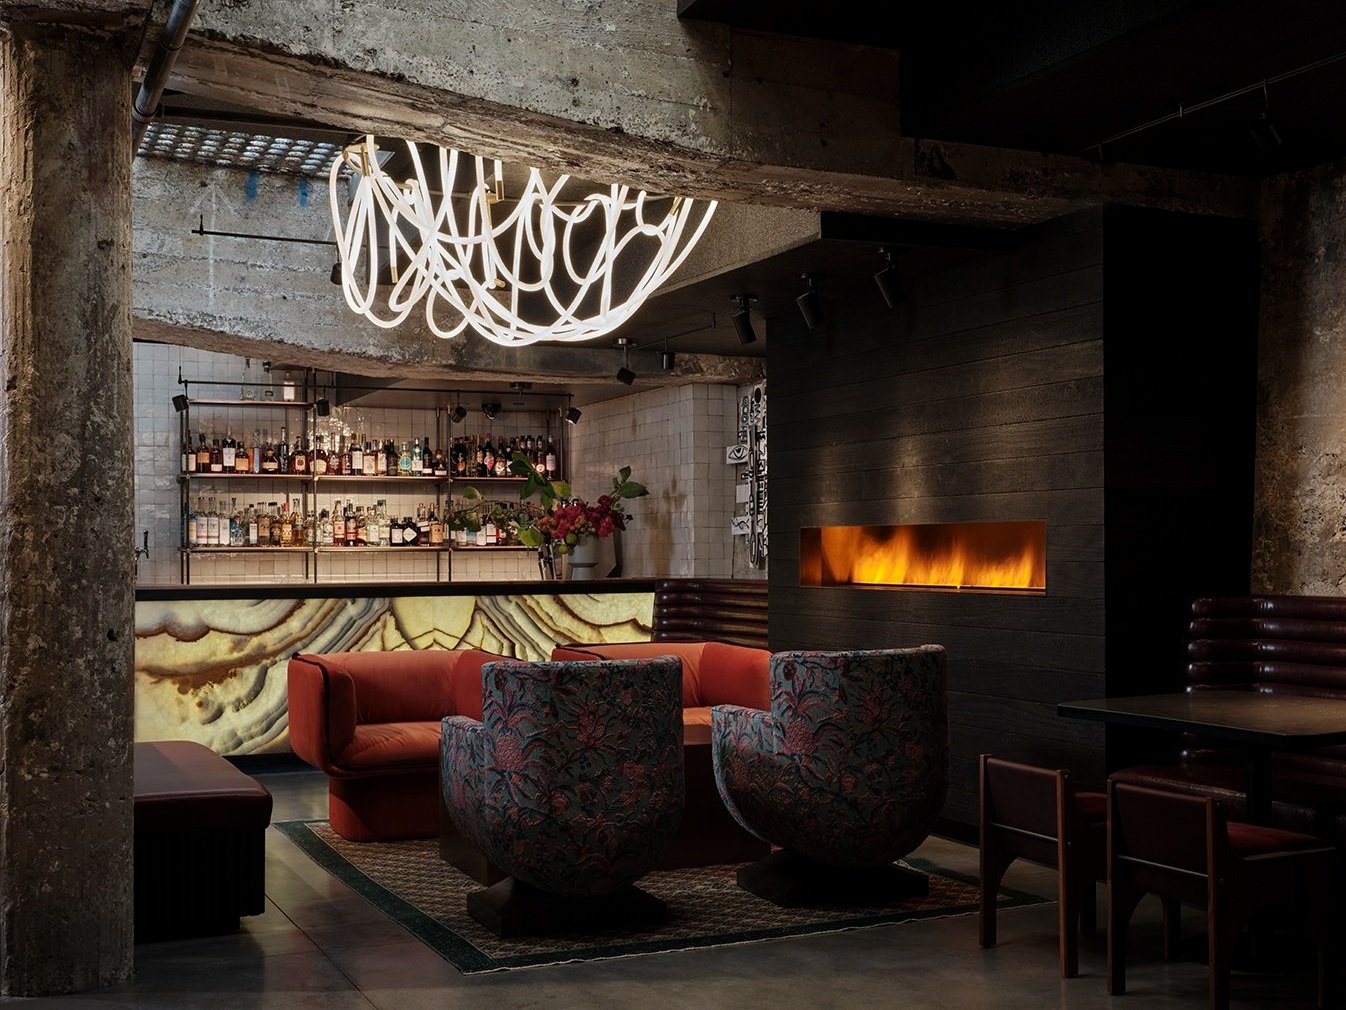 Cozy seating area in foreground, with a large modern gas fireplace on right and a bar in center background.